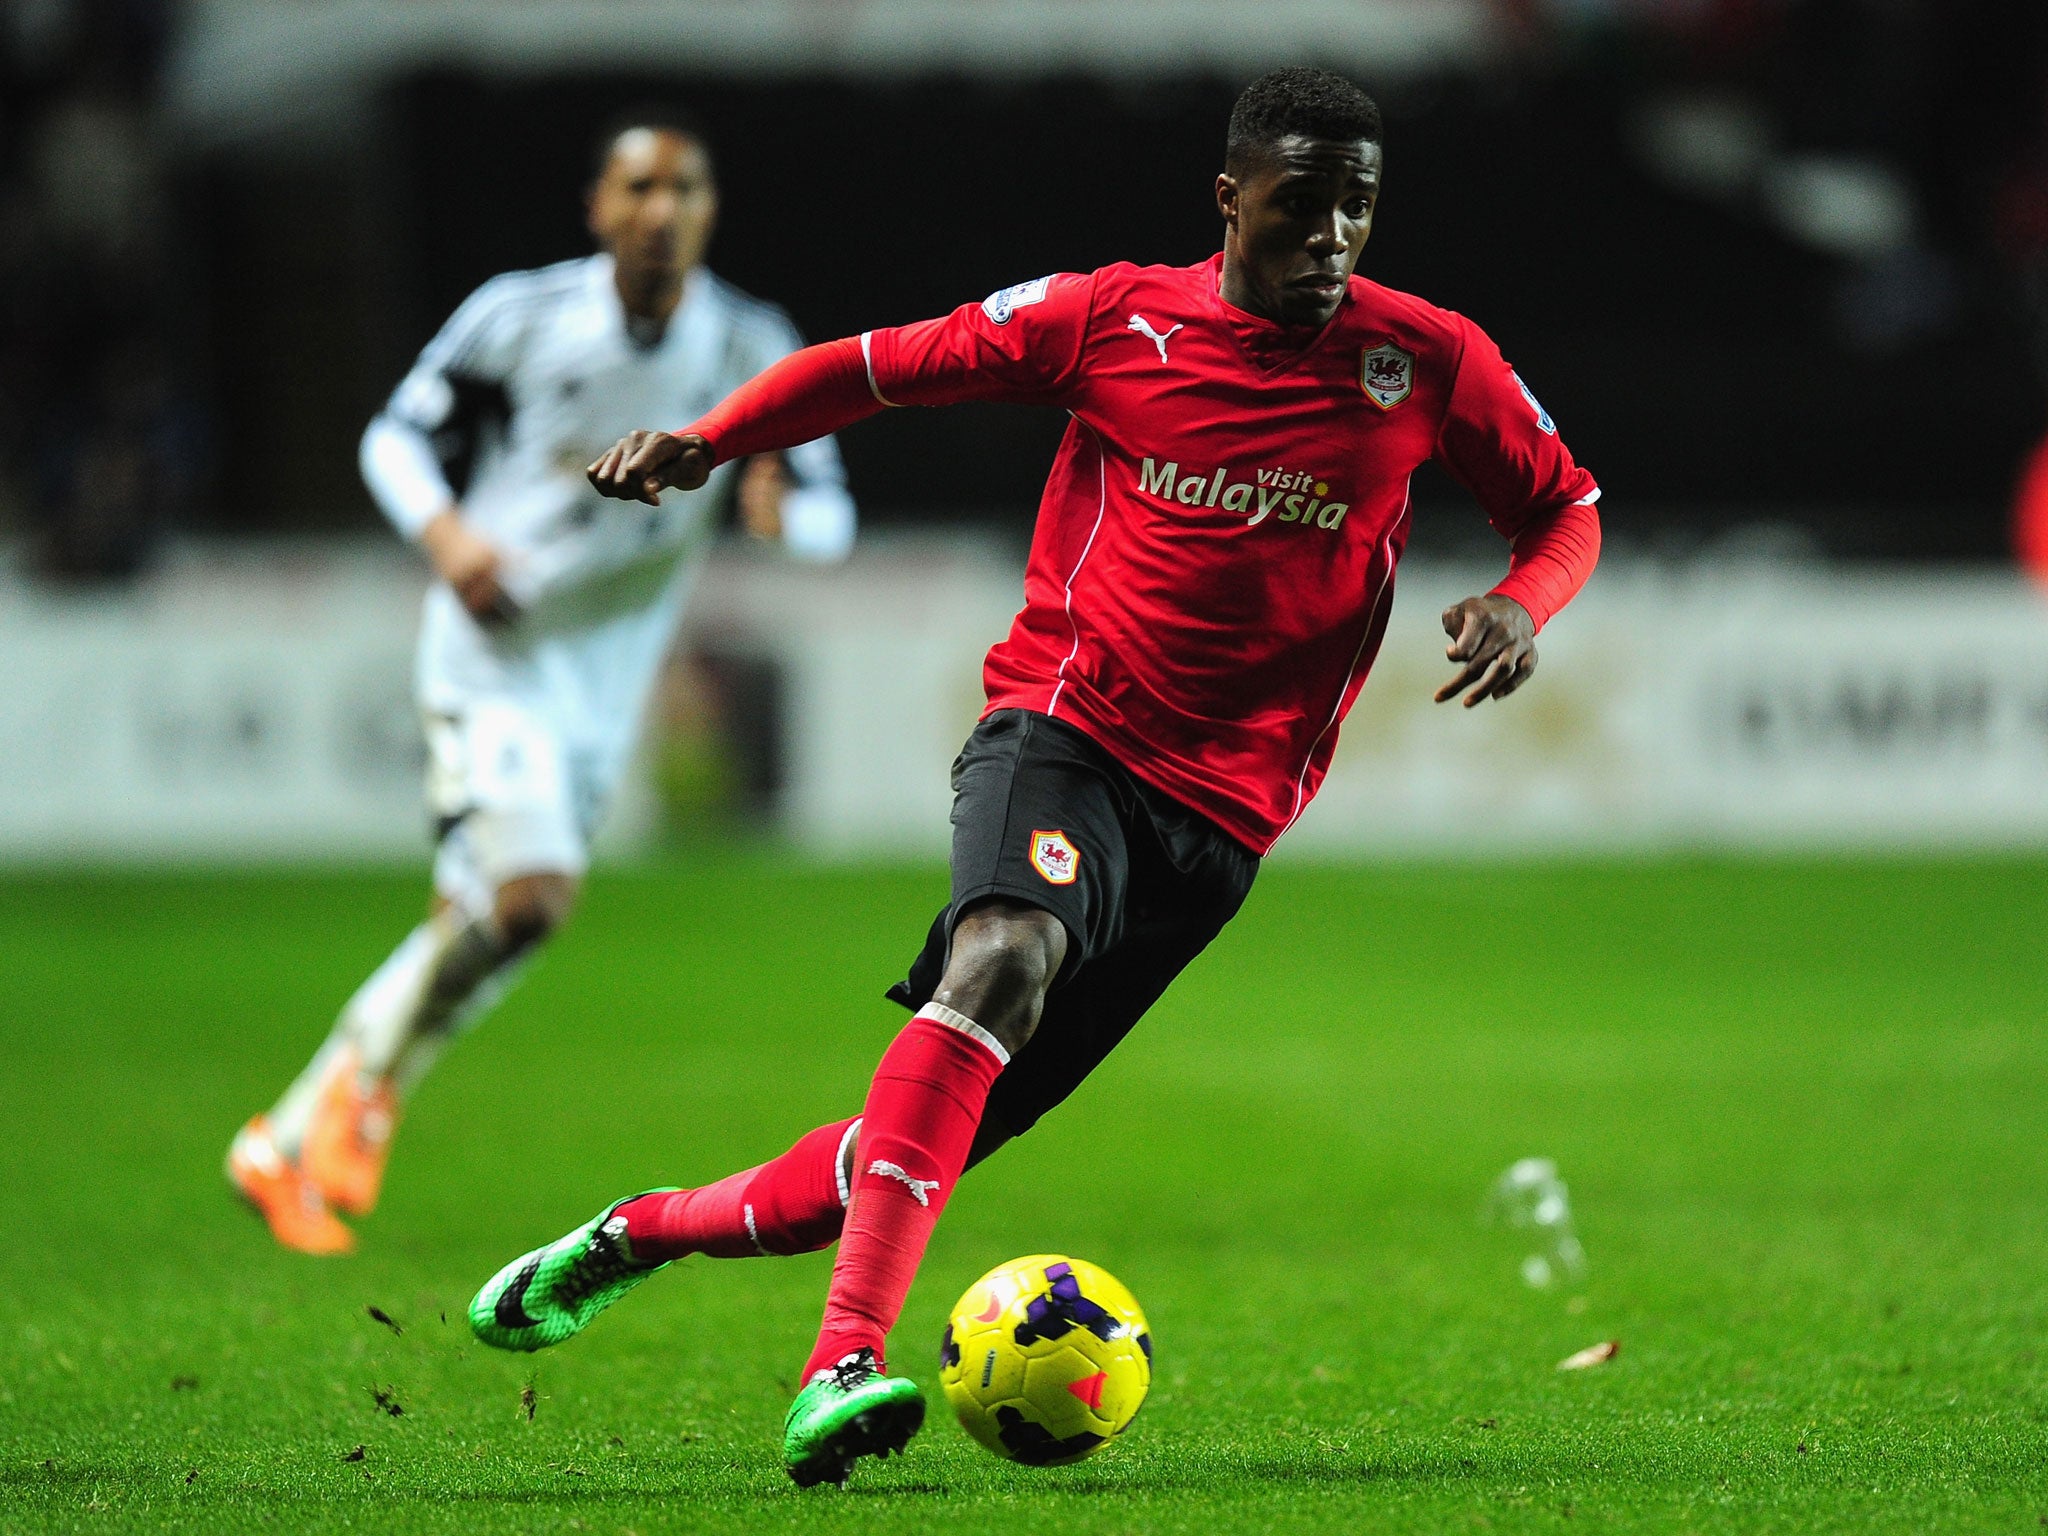 Manchester United winger Wilfried Zaha in action for Cardiff City, where he is currently on loan until the end of the season